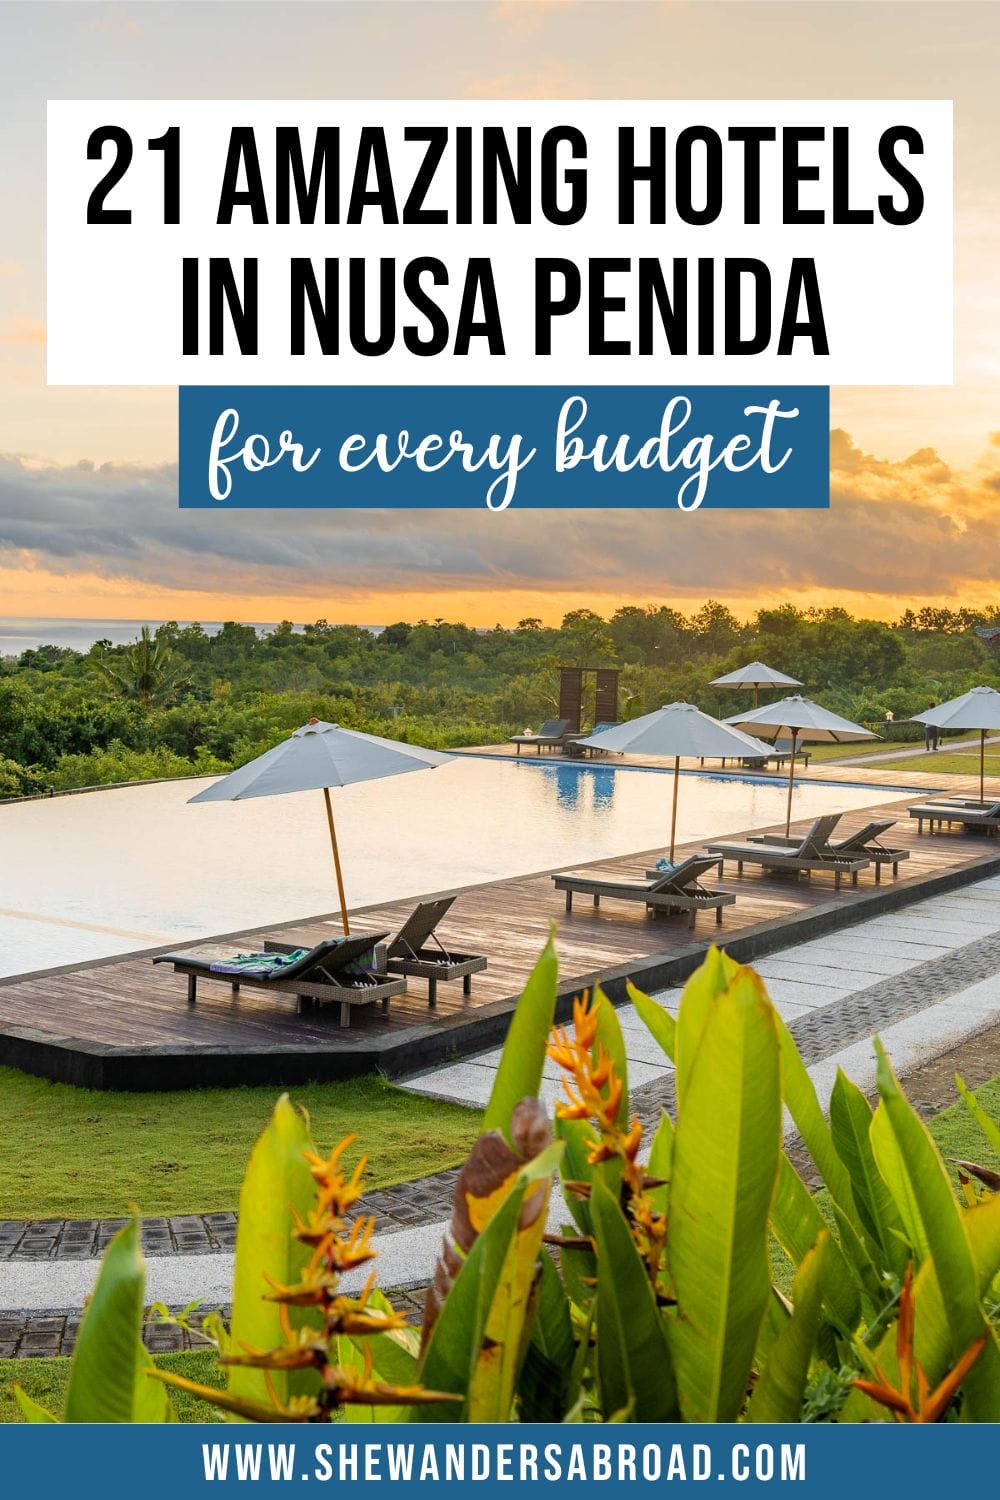 Best Hotels in Nusa Penida for every budget